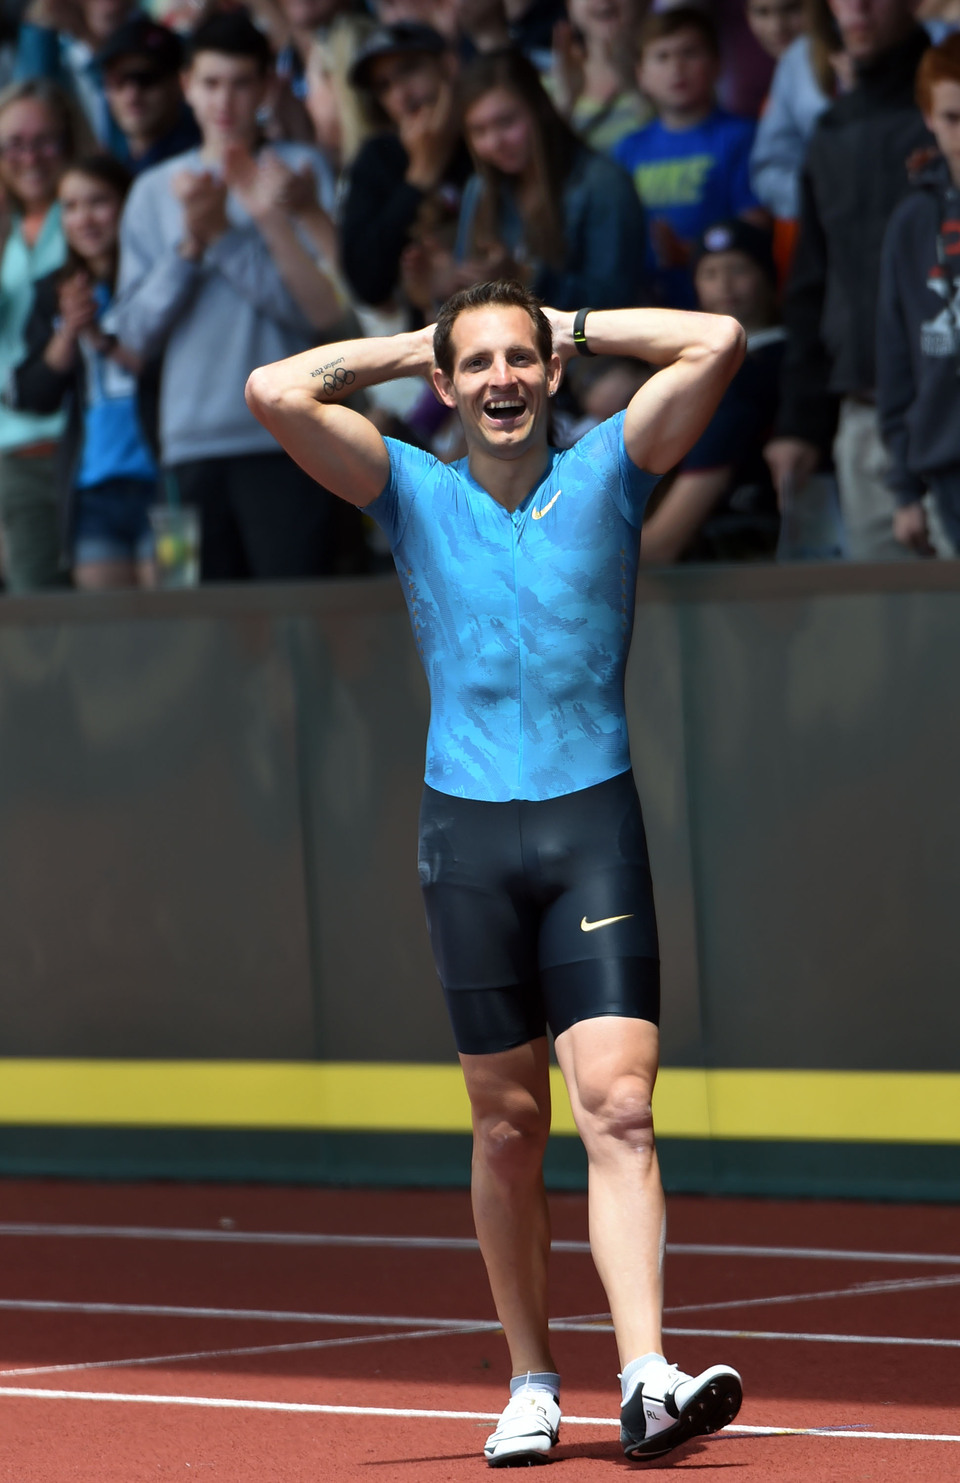 Renaud Lavillenie of France celebrates after clearing the bar on his way to winning the Men's Pole Vault on the final day of the Prefontaine Classic at Hayward Field in Eugene, Oregon, USA, on Saturday.  EPA Photo/Steve Dykes